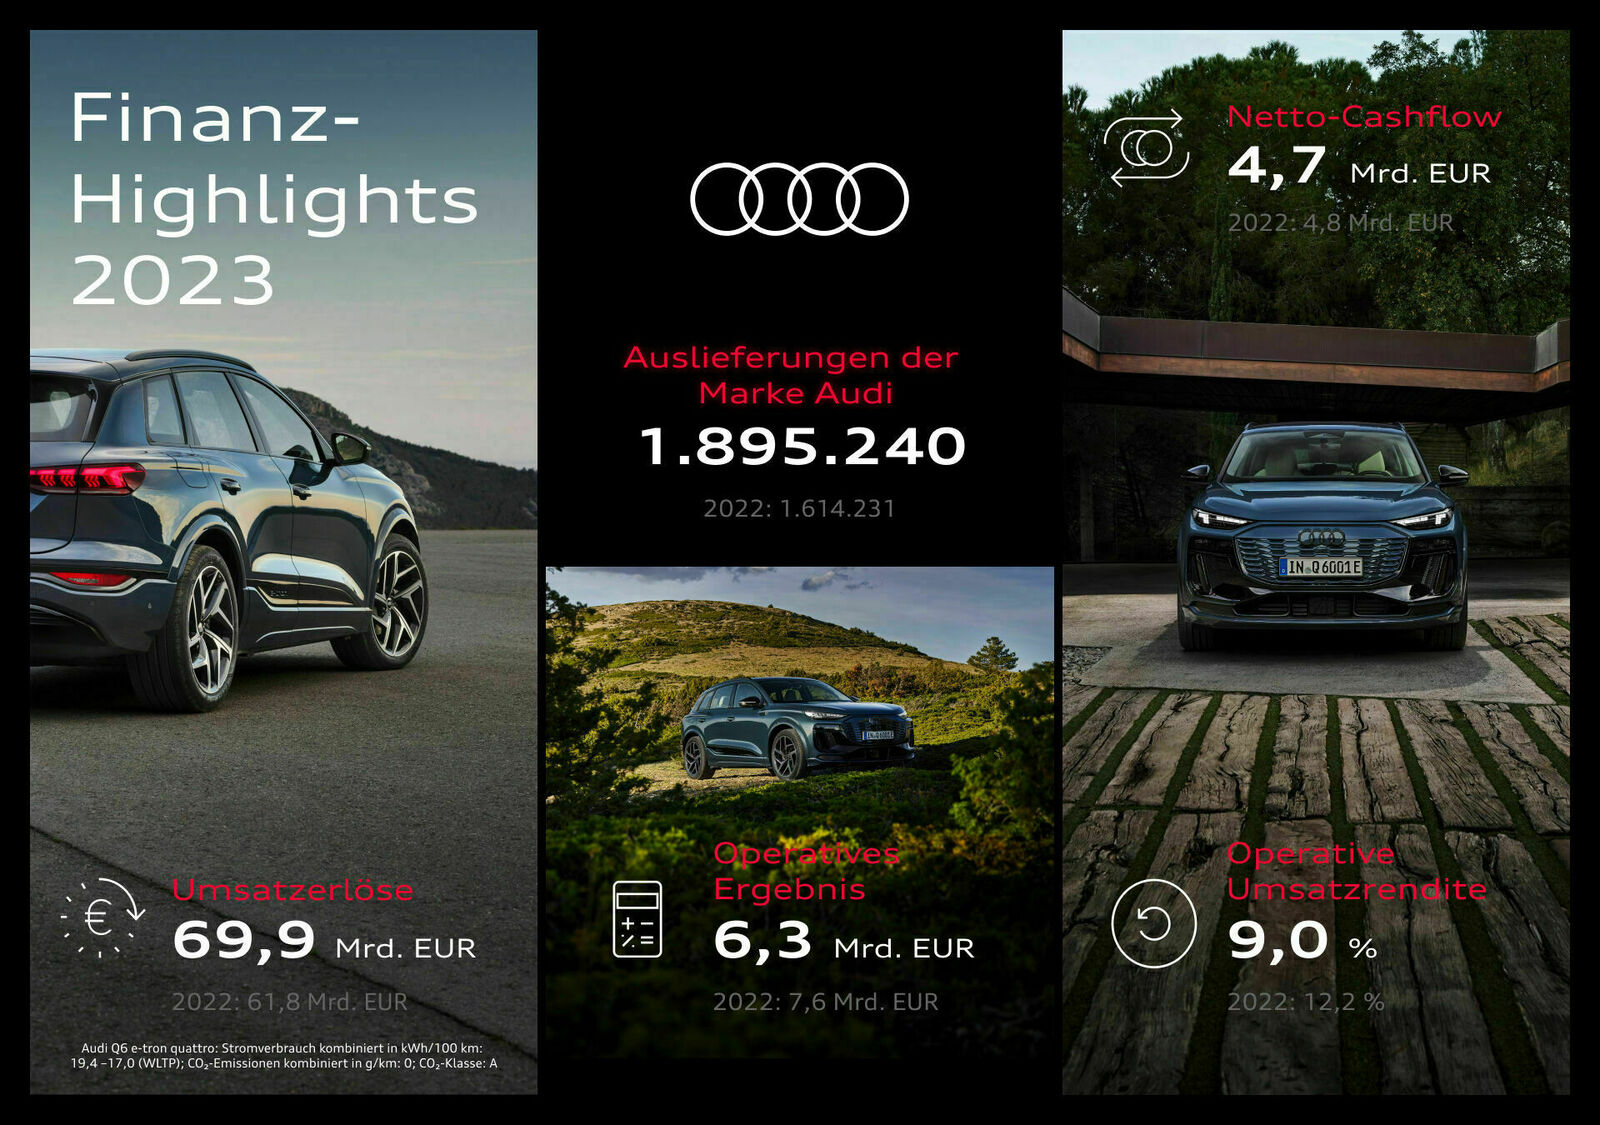 Infographic of Audi's Financial Highlights 2023 with images of cars and key figures such as deliveries, revenue, operating result, and operating return on sales.